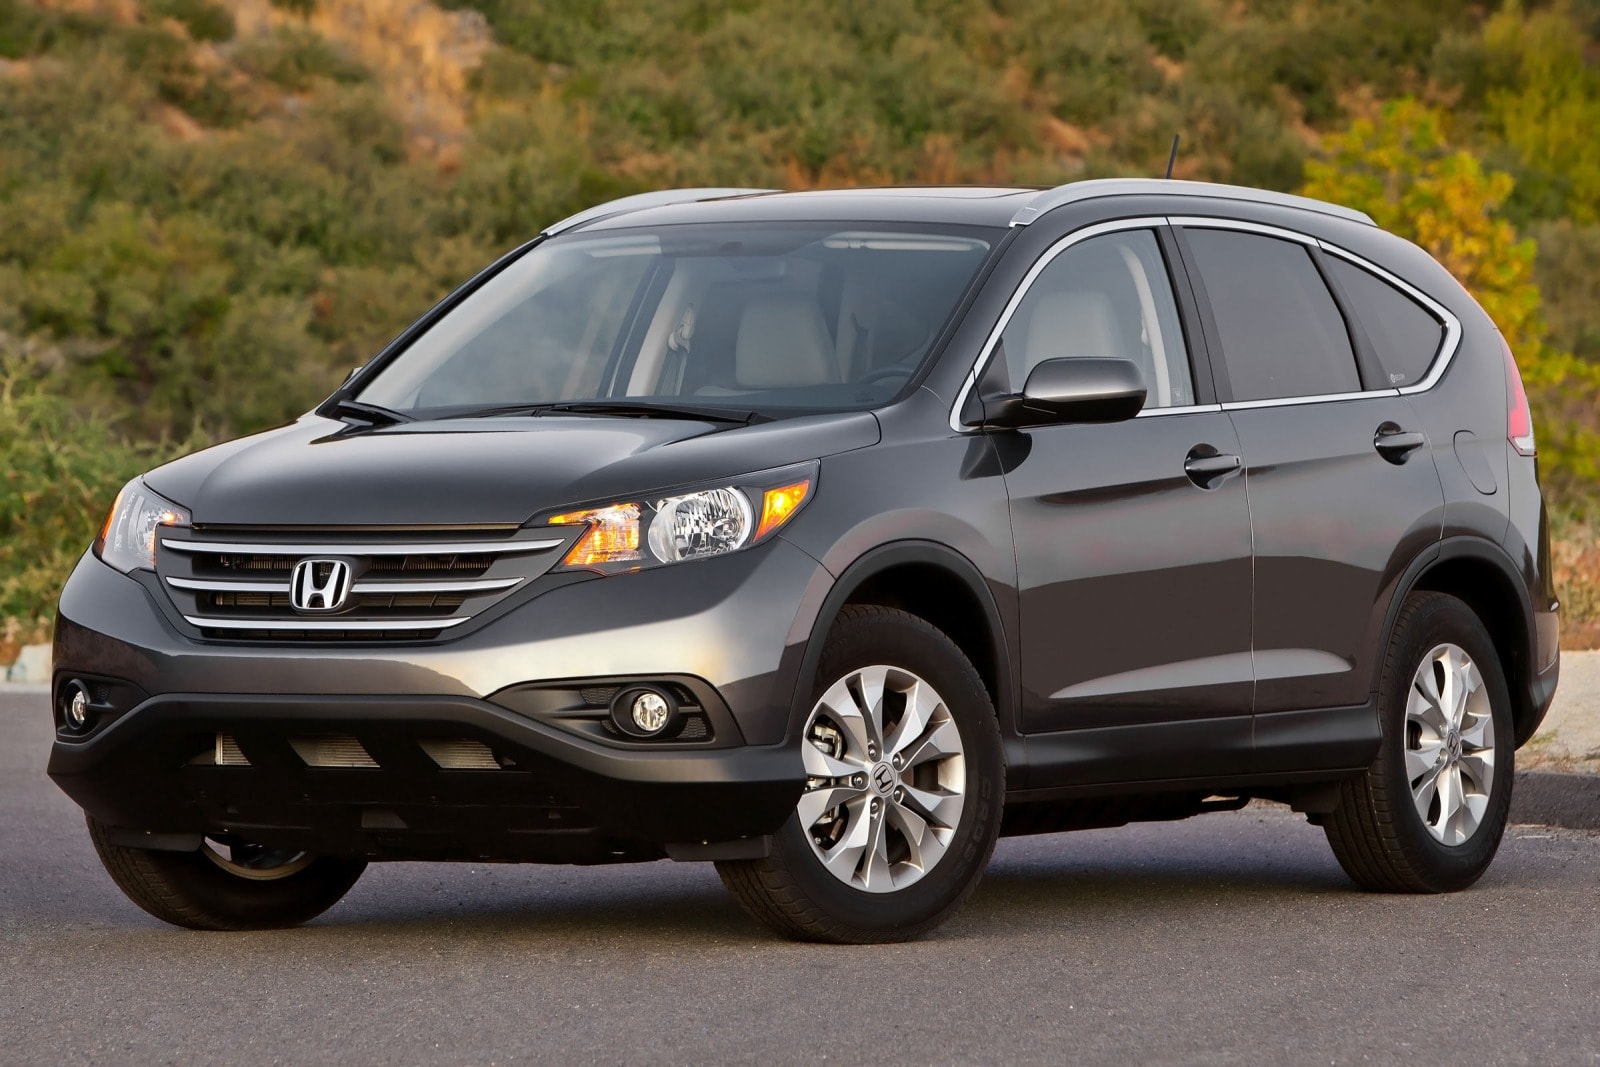 Chewing gum Exactly All kinds of 2014 Honda CR-V Review & Ratings | Edmunds